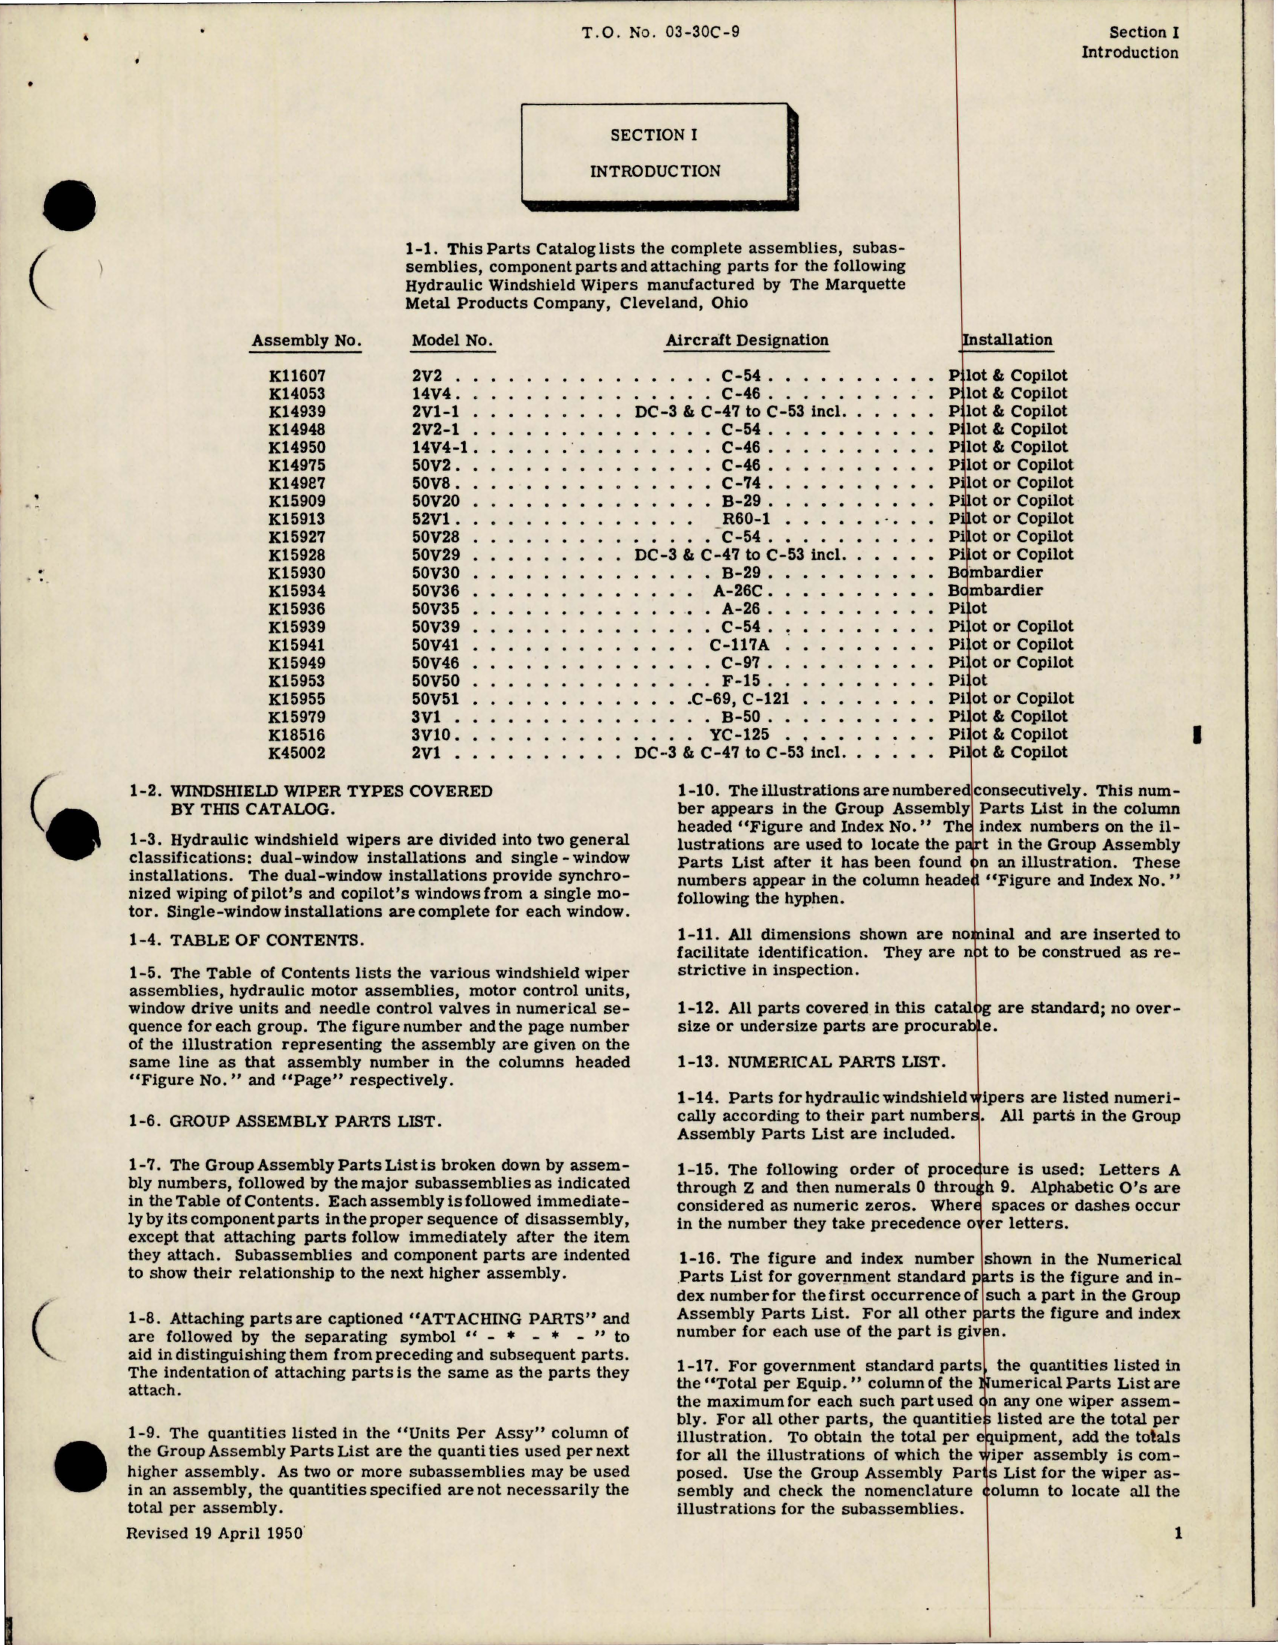 Sample page 7 from AirCorps Library document: Parts Catalog for Hydraulic Windshield Wipers 